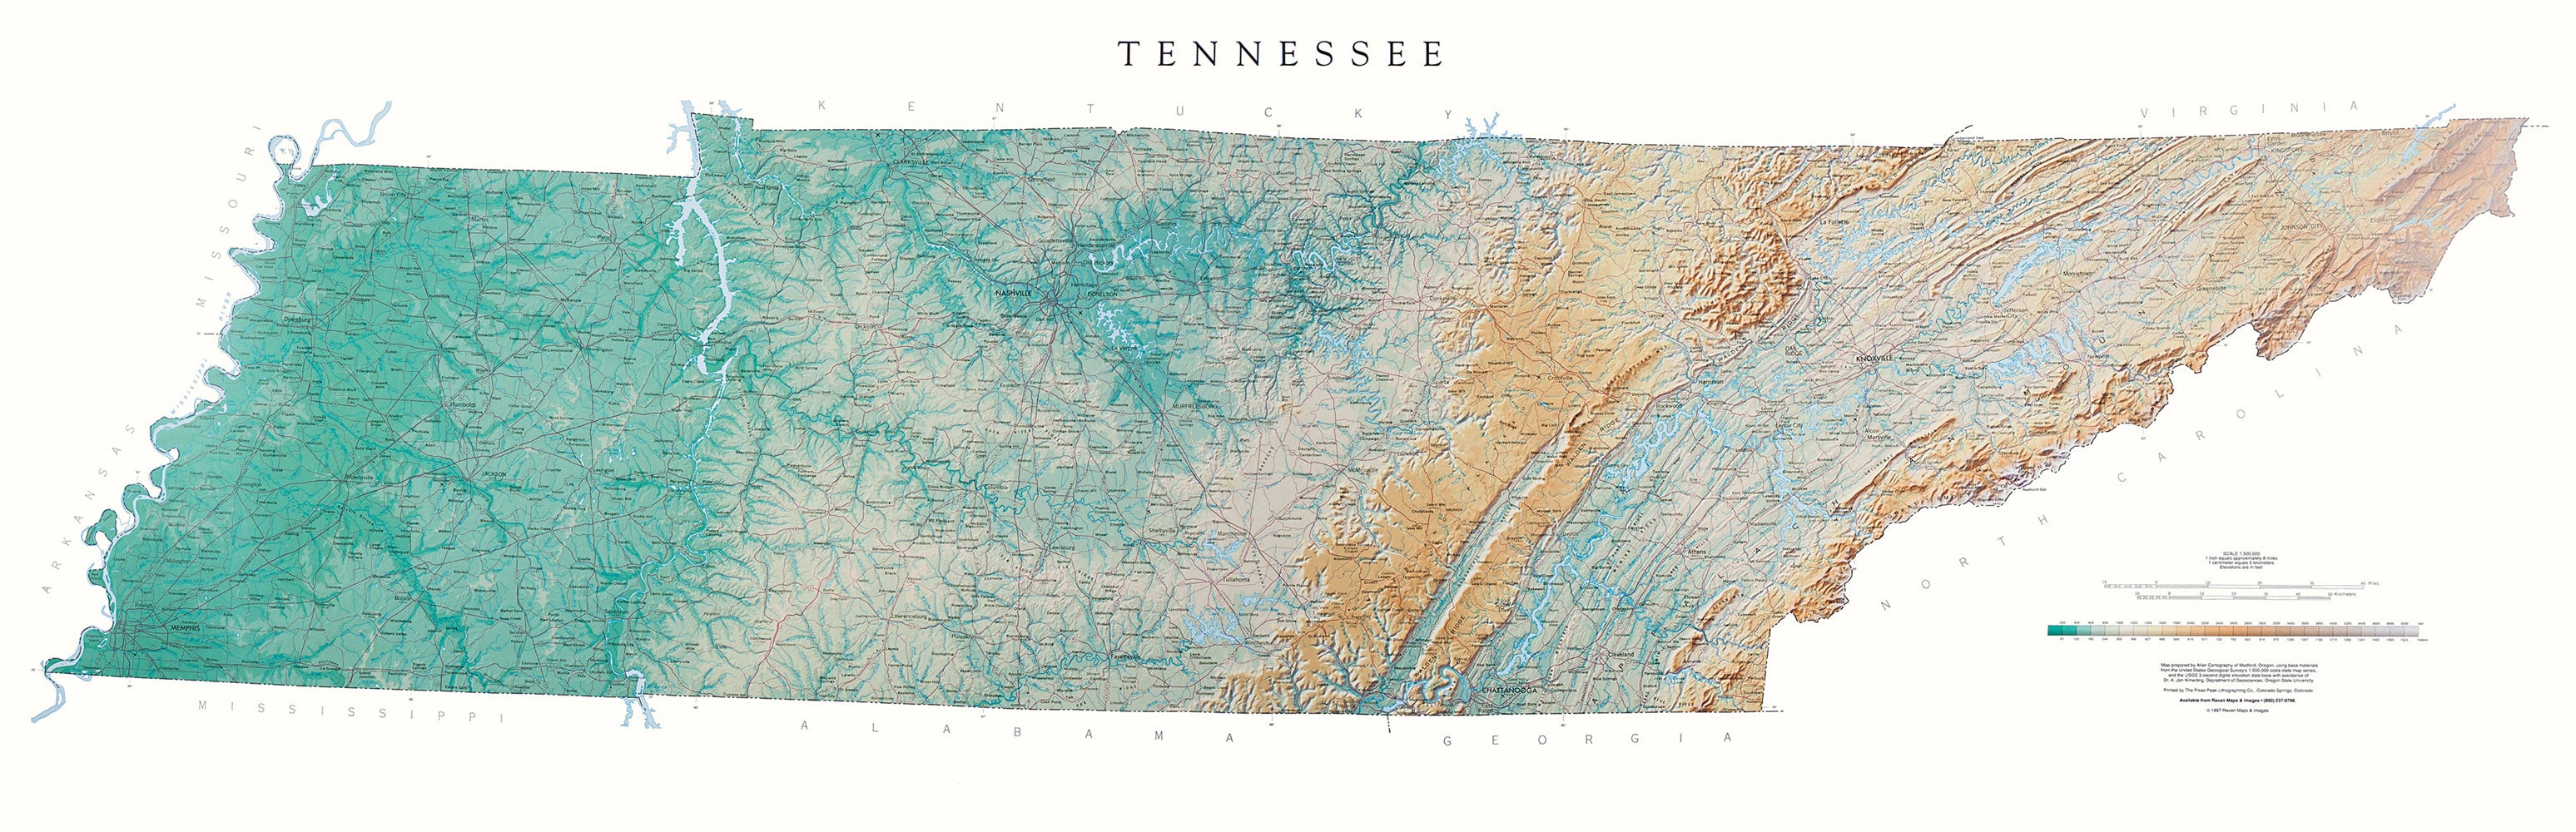 Tennessee Topographical Wall Map By Raven Maps, 21" X 65"